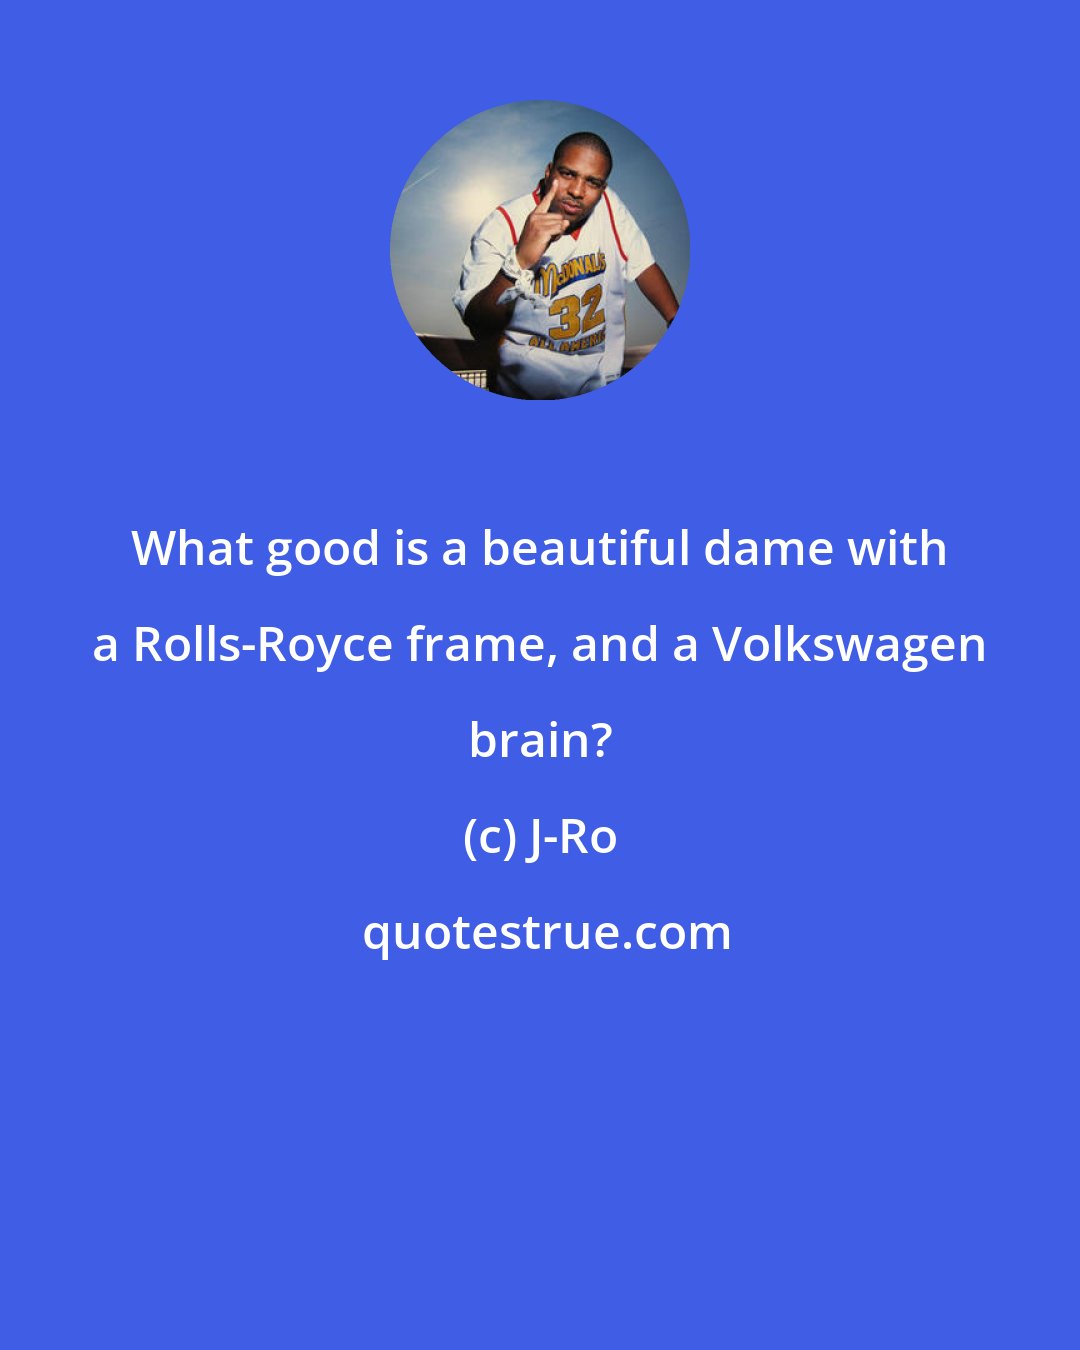 J-Ro: What good is a beautiful dame with a Rolls-Royce frame, and a Volkswagen brain?